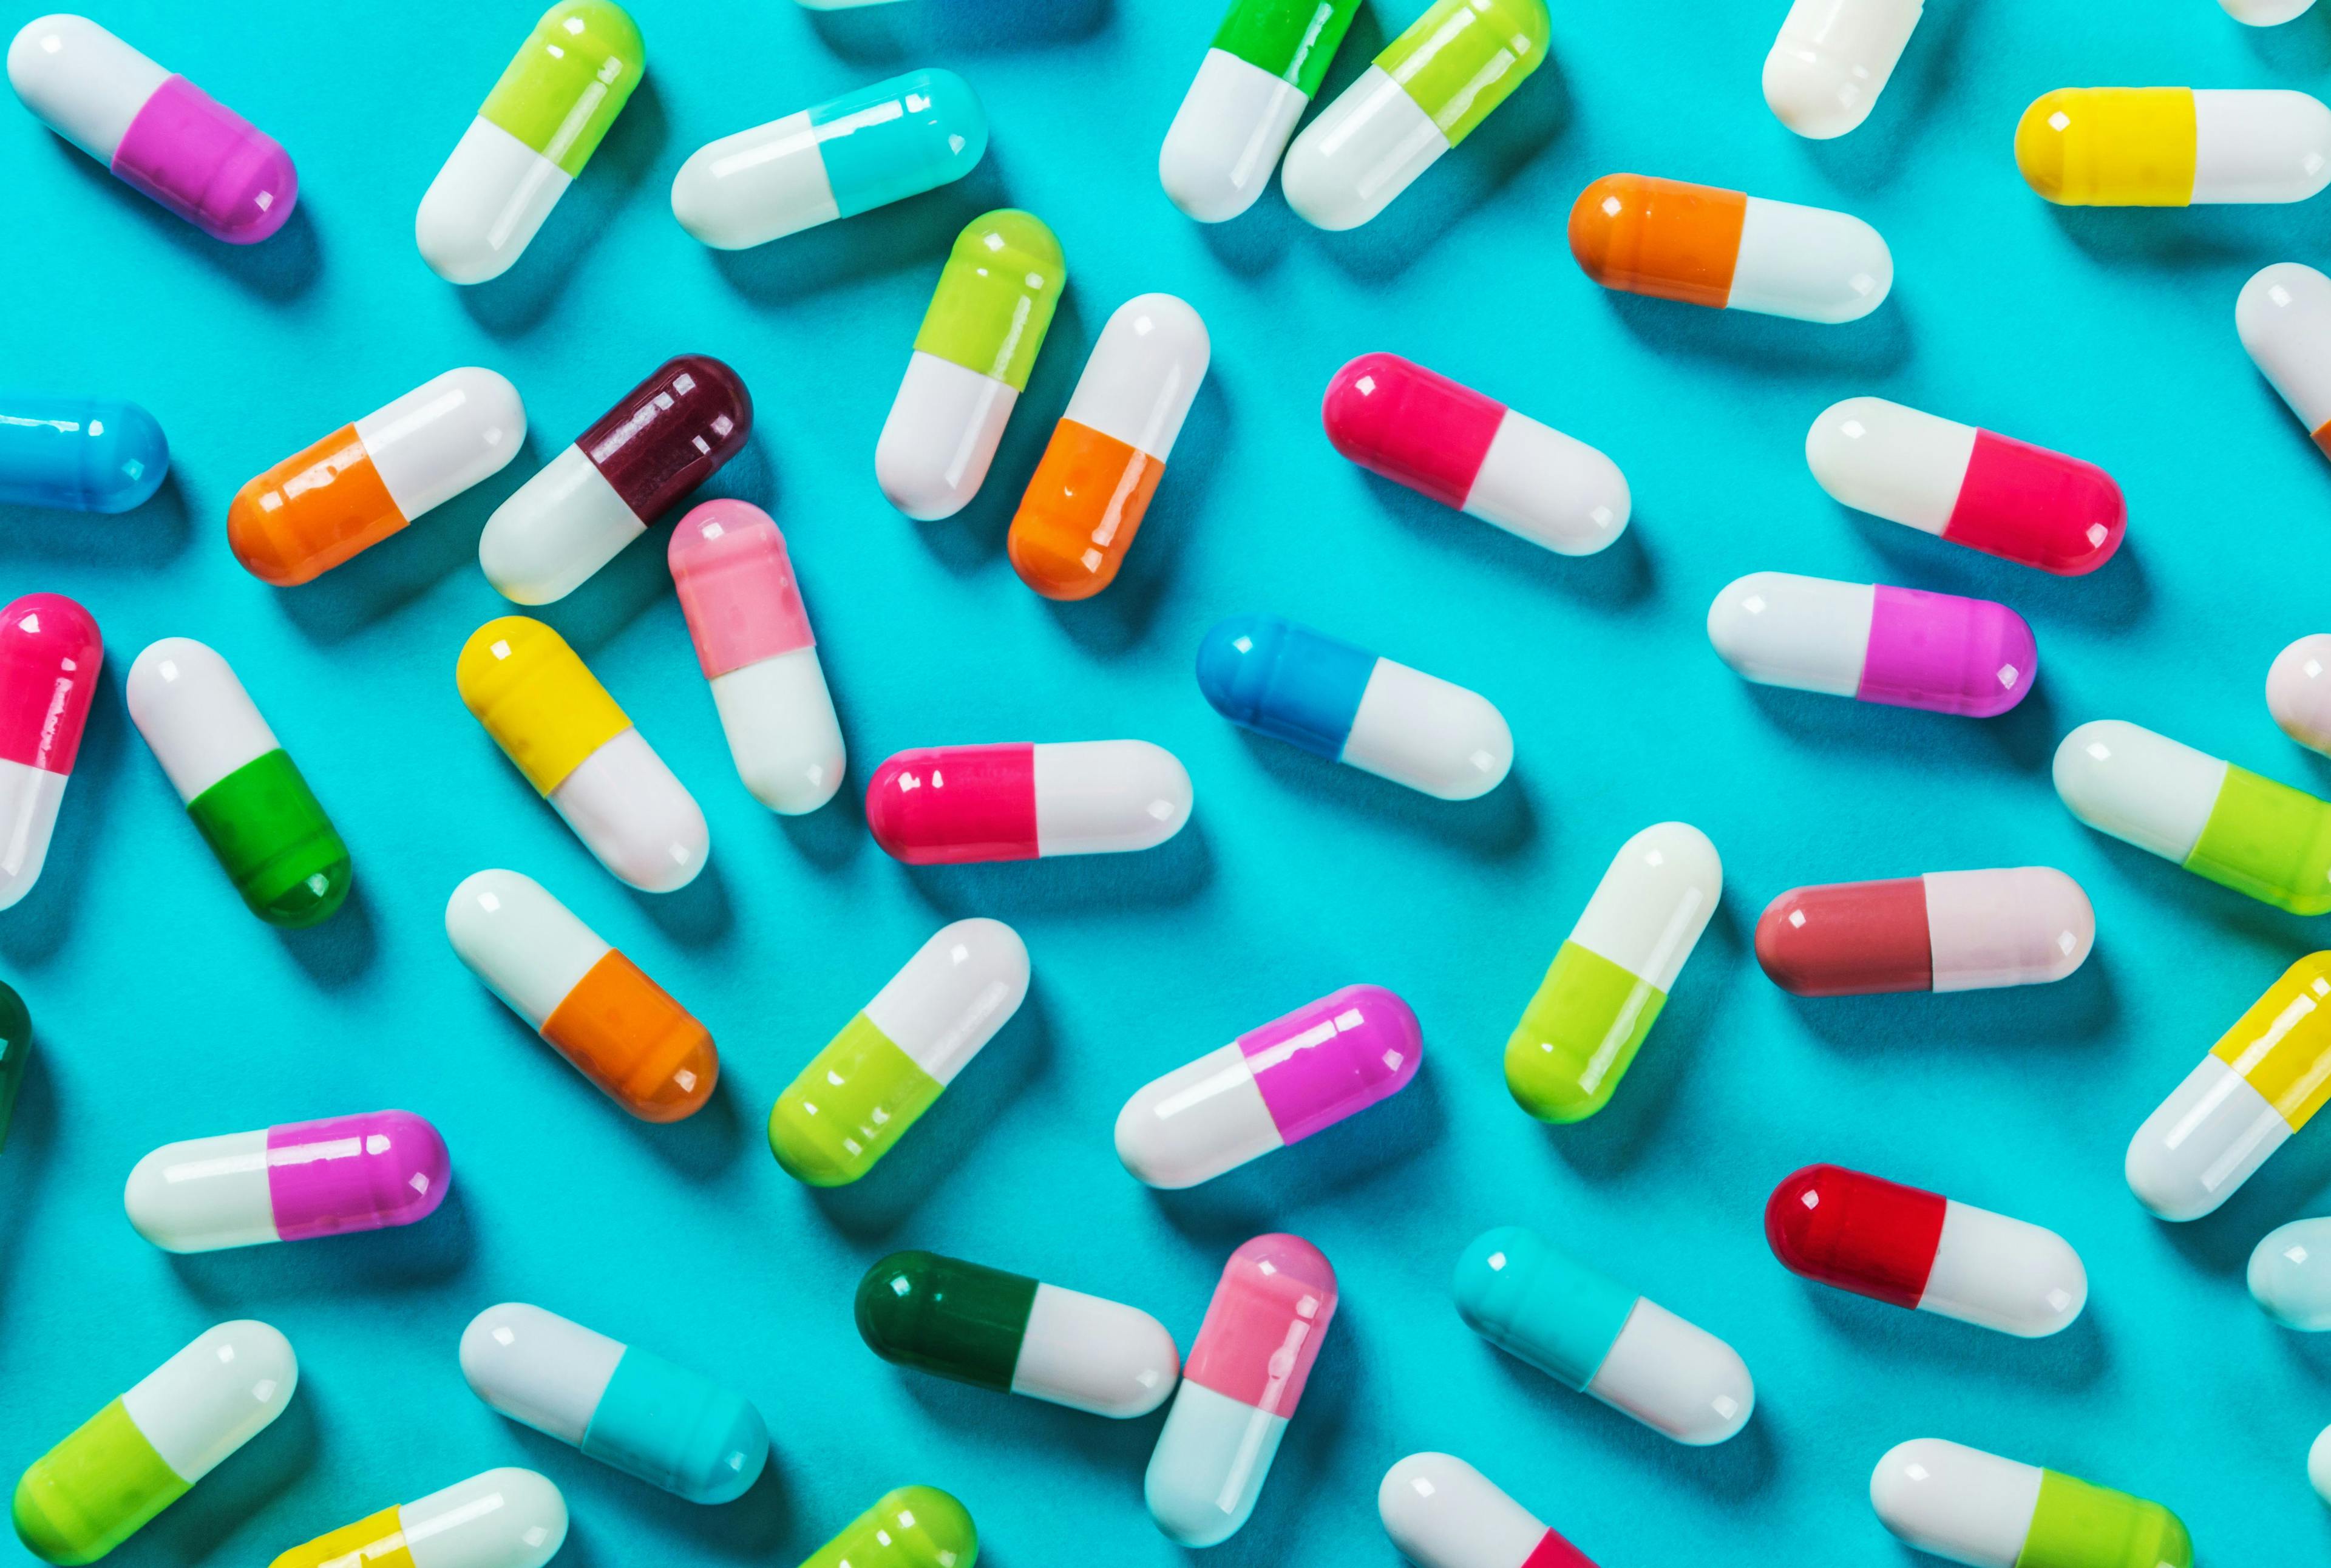 Patterns in New Formulation Approvals Suggest “Evergreening” by Drugmakers, Researchers Report